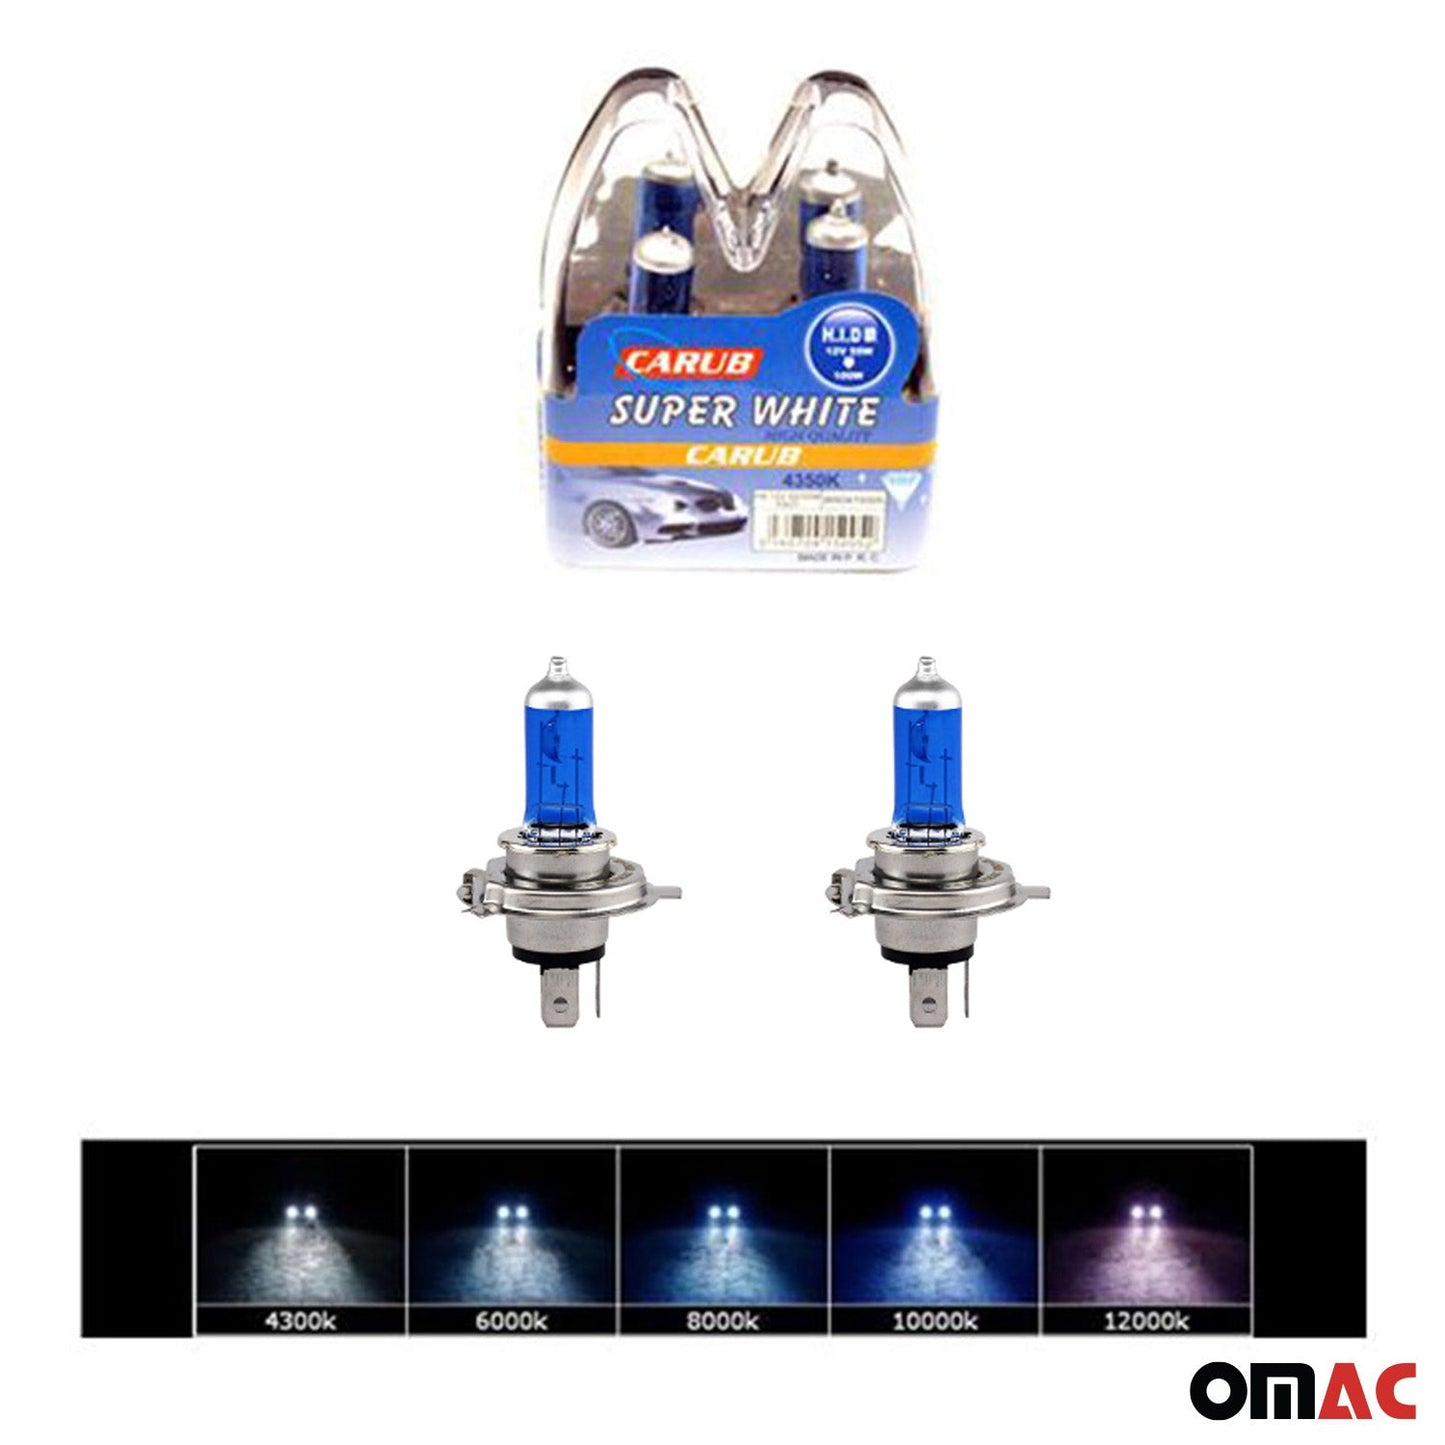 OMAC Xenon 4350K H4 55W Replacement Bulb HID Headlight Lamp SUPER WHITE 2 Pack BR0415005